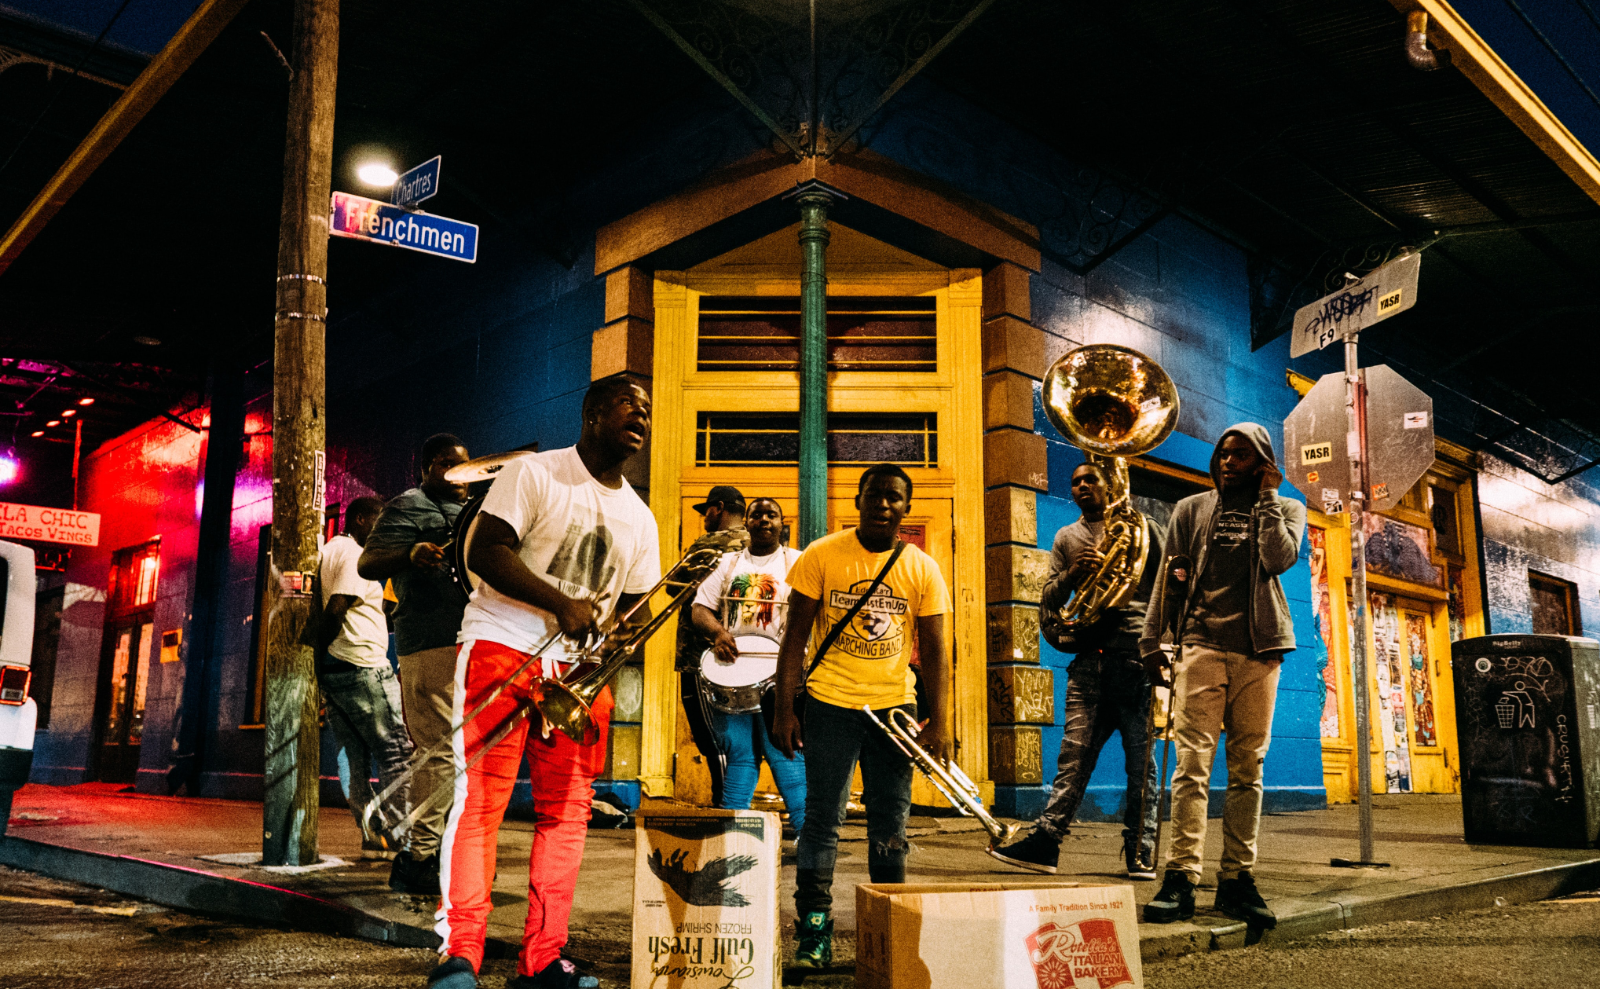 a group of musicians playing on a street corner in front of a blue and yellow building at night